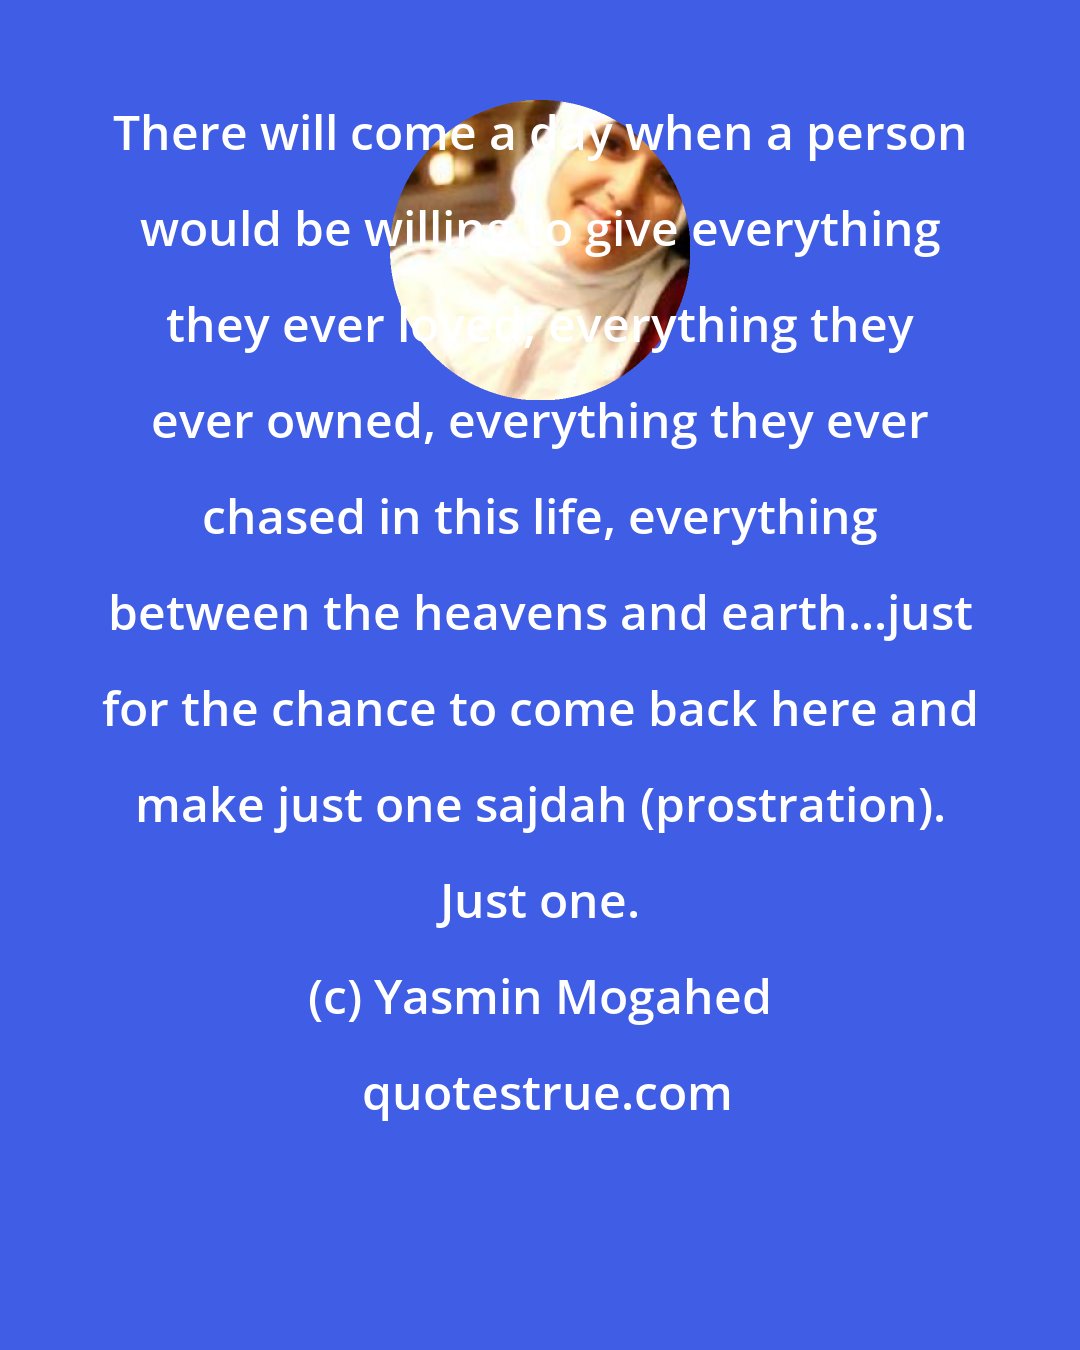 Yasmin Mogahed: There will come a day when a person would be willing to give everything they ever loved, everything they ever owned, everything they ever chased in this life, everything between the heavens and earth...just for the chance to come back here and make just one sajdah (prostration). Just one.